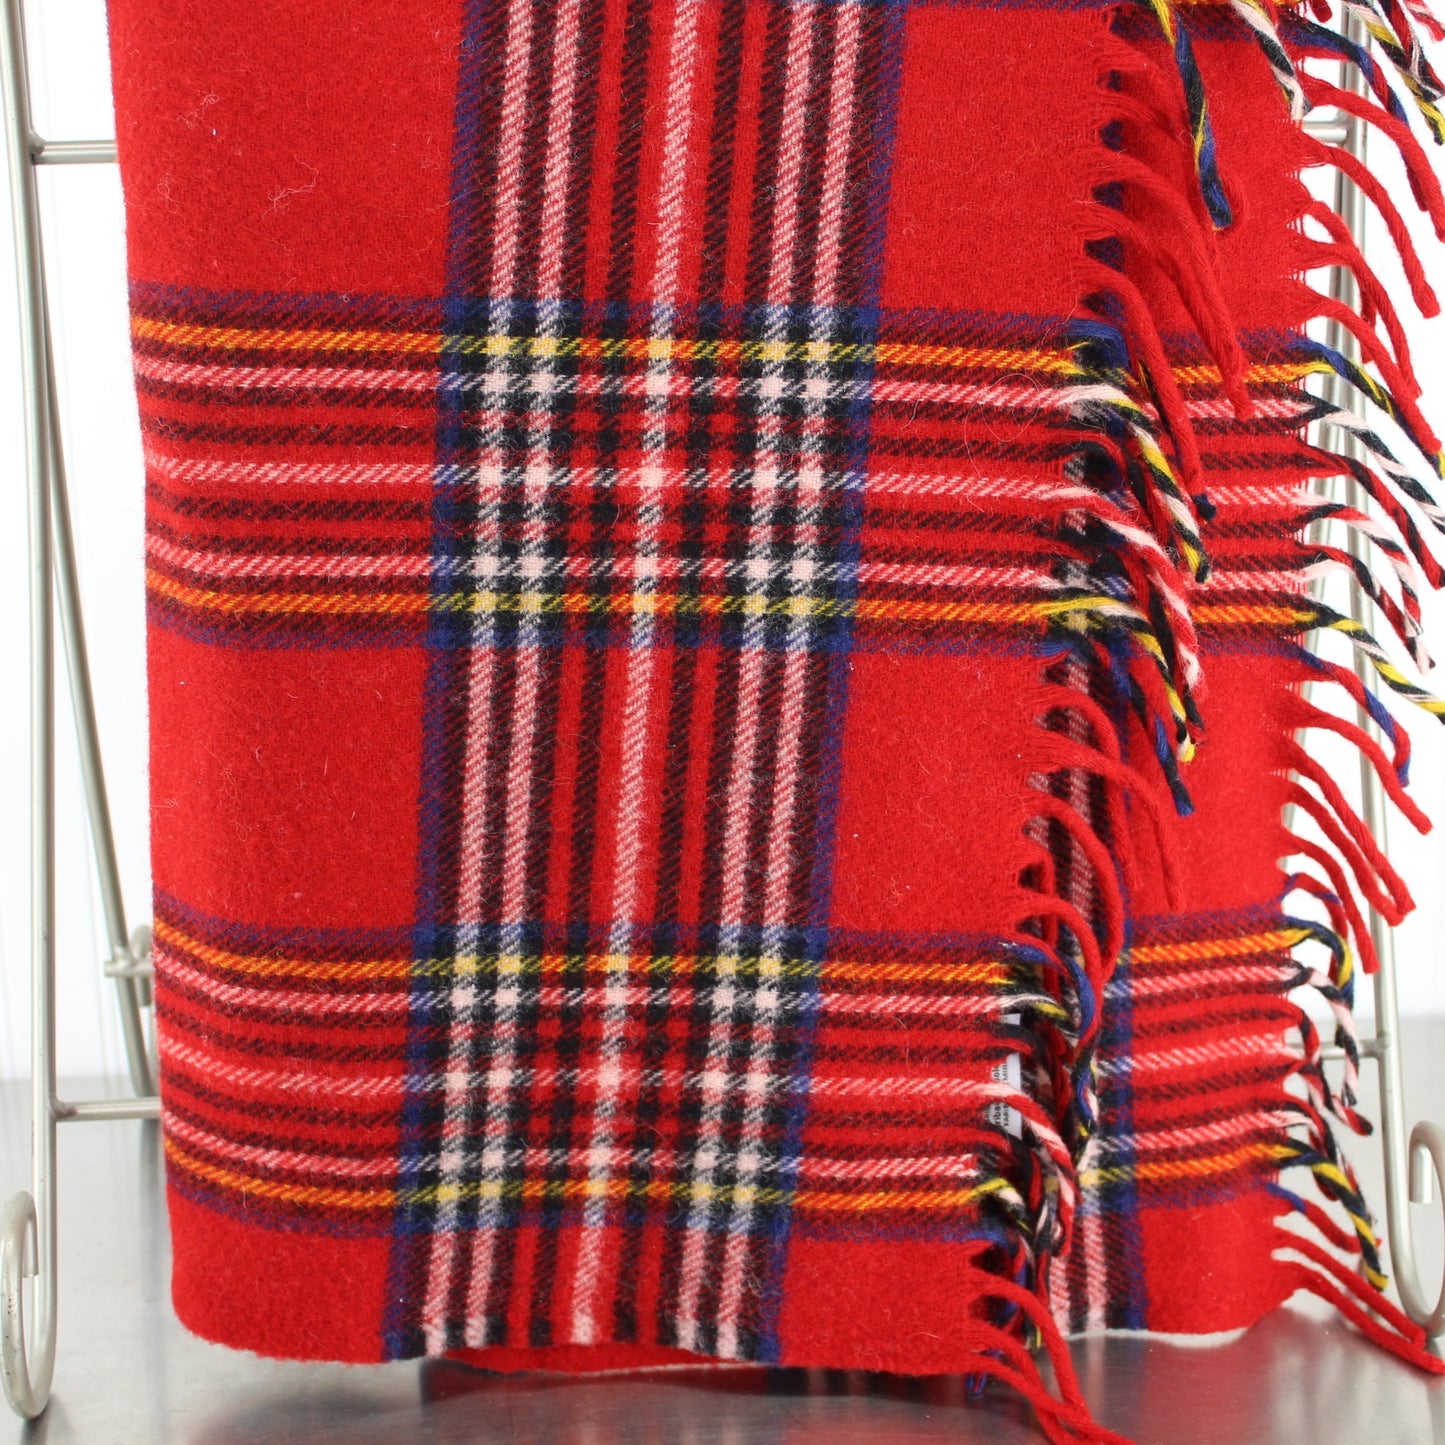 Faribo Classic Wool Throw Blanket Red Plaid - 54" by 50" USA fringe on sides design